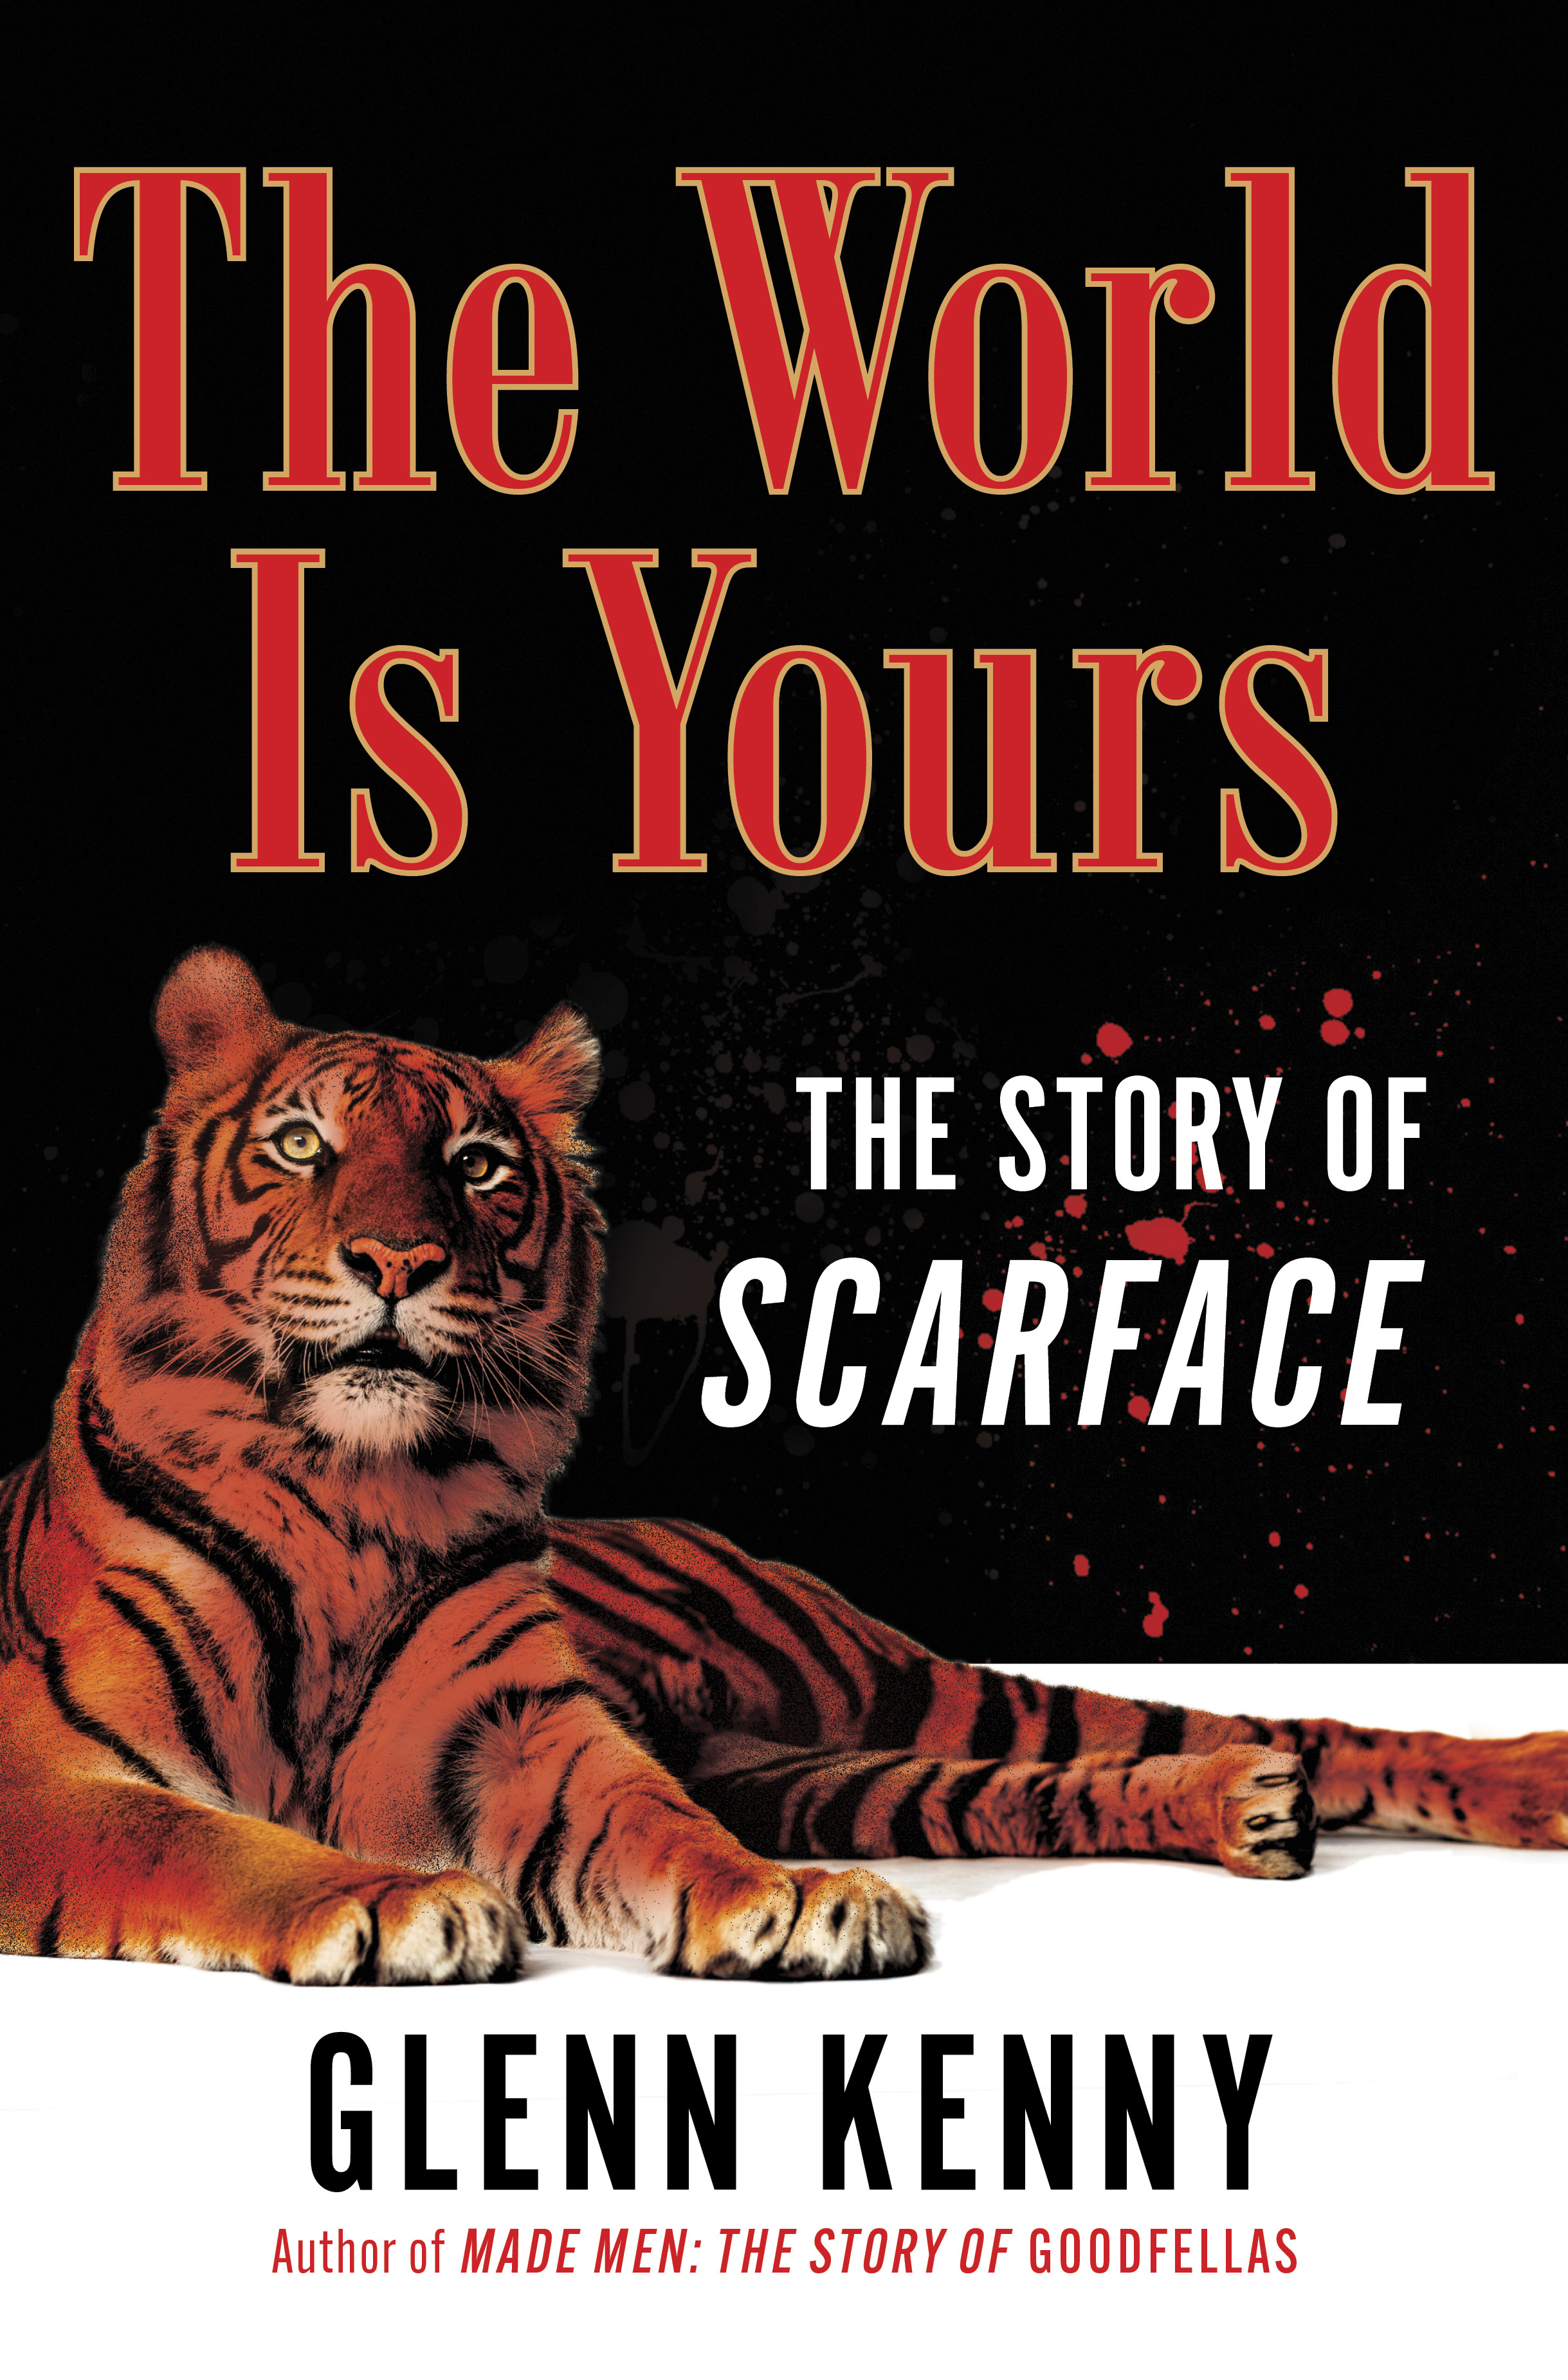 The cover of "The World Is Yours: The Story of Scarface."